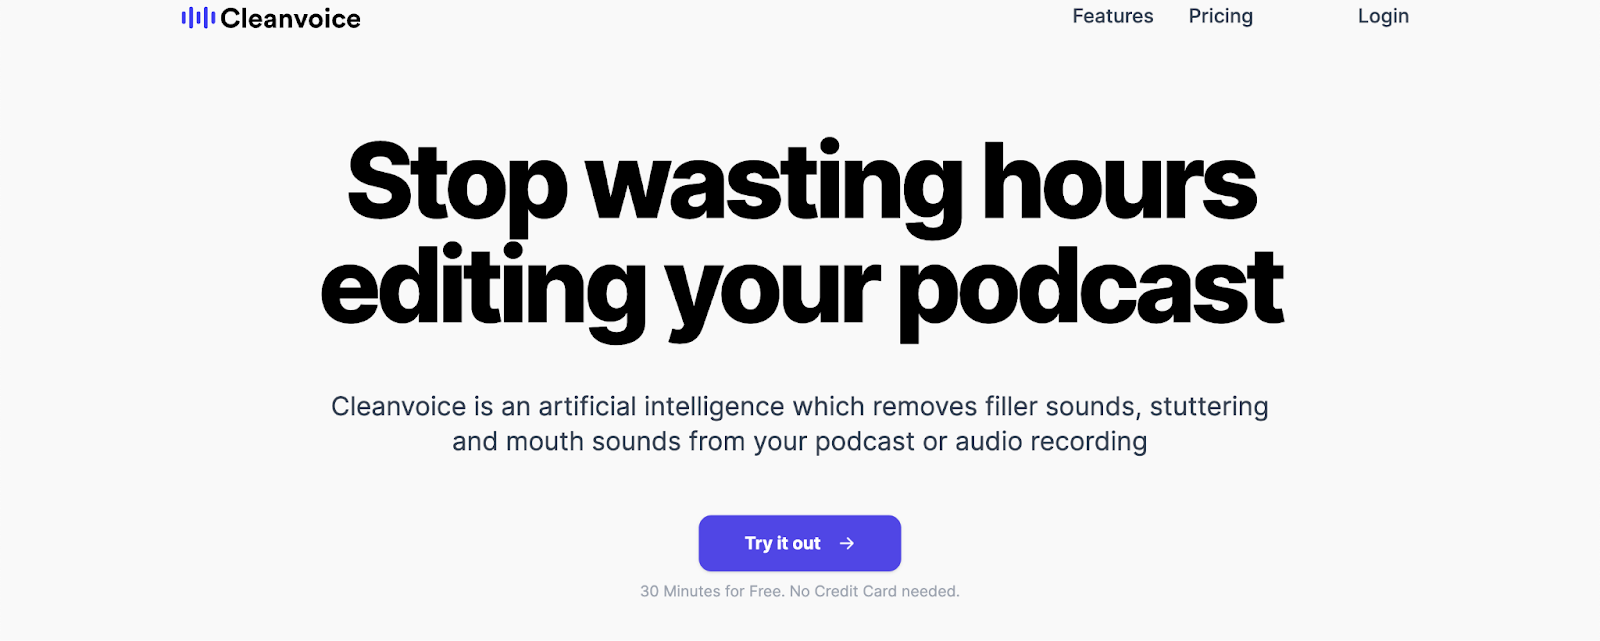 The Cleanvoice homepage that demands that you 'stop wasting hours editing your podcast'. 